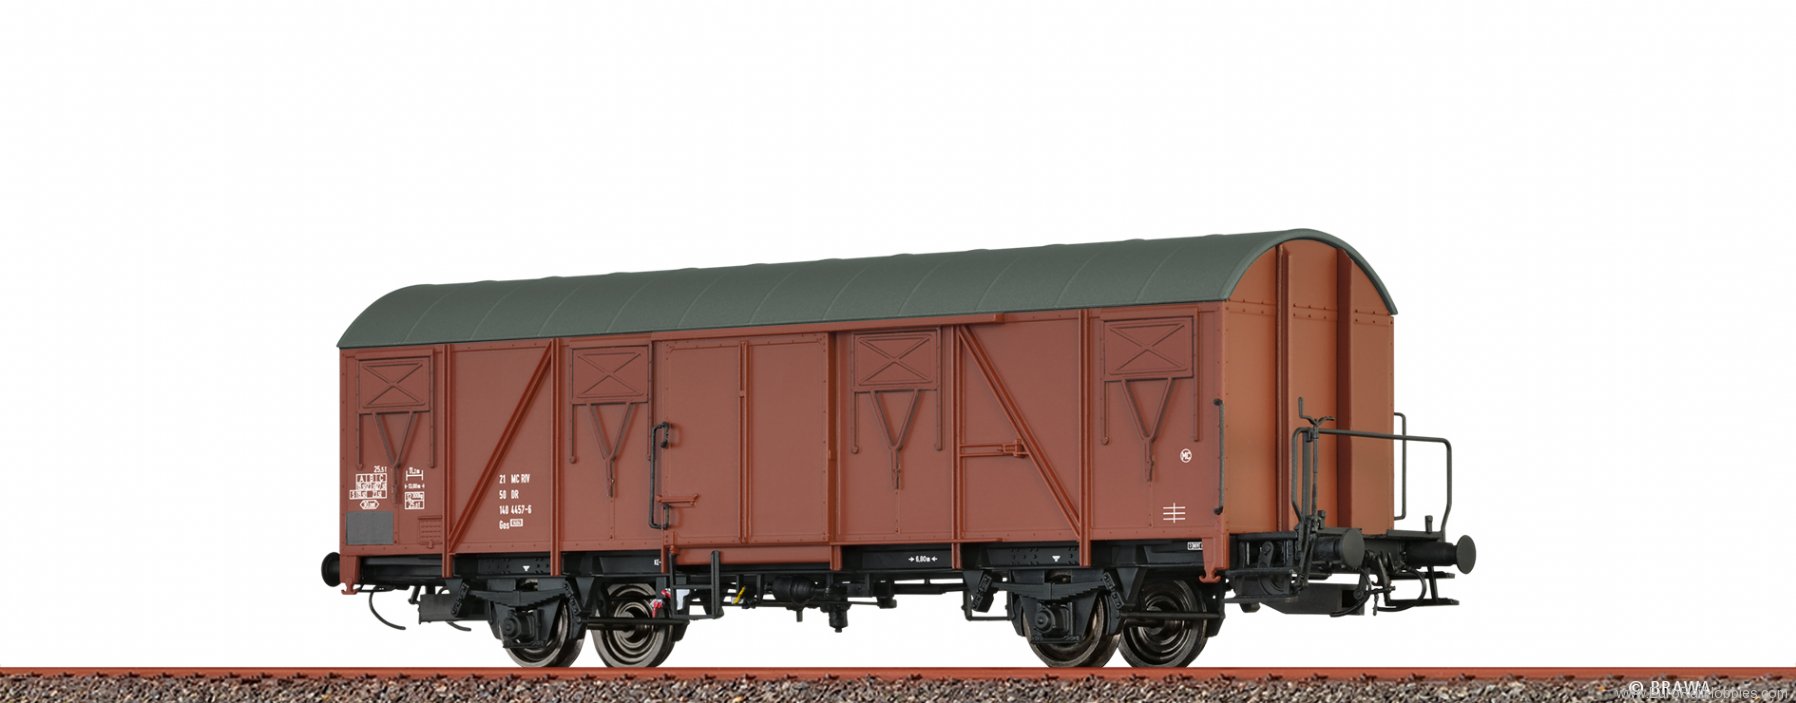 Brawa 50909 Covered Freight Car Gos[1404] DR